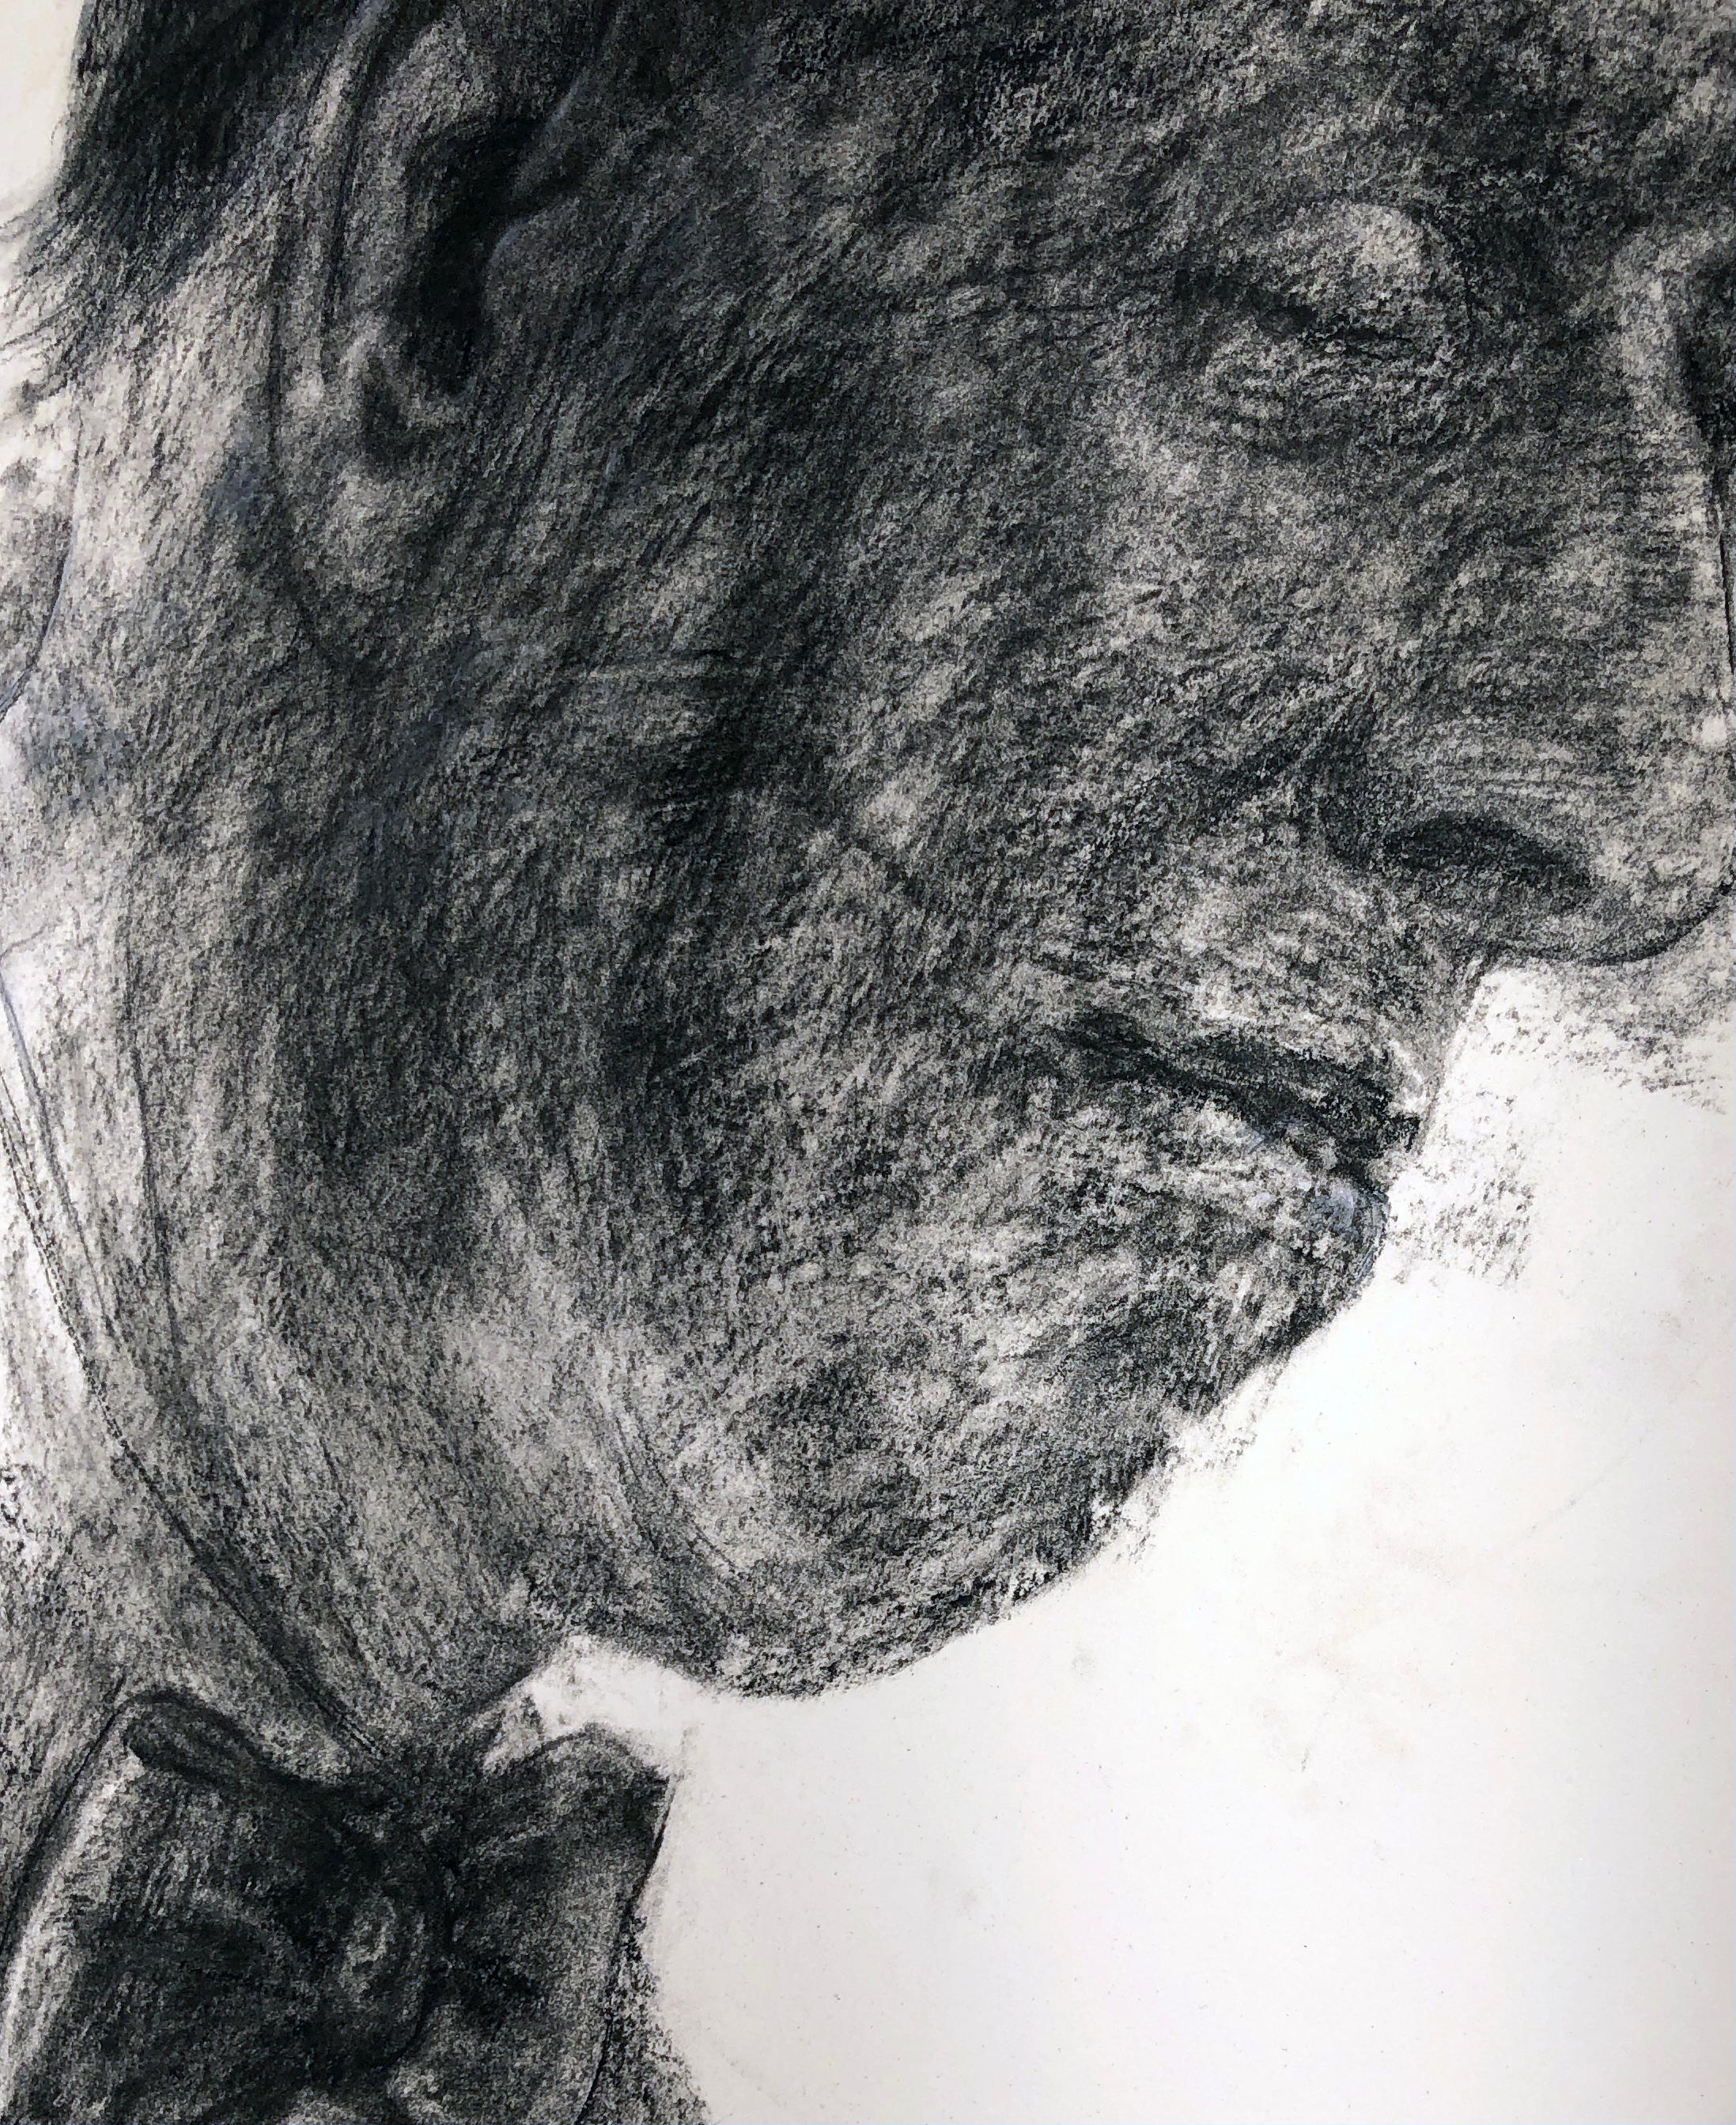 Reflection #1, Charcoal Drawing of a Man Gazing Down, Wearing a Bow Tie - Contemporary Art by David Becker